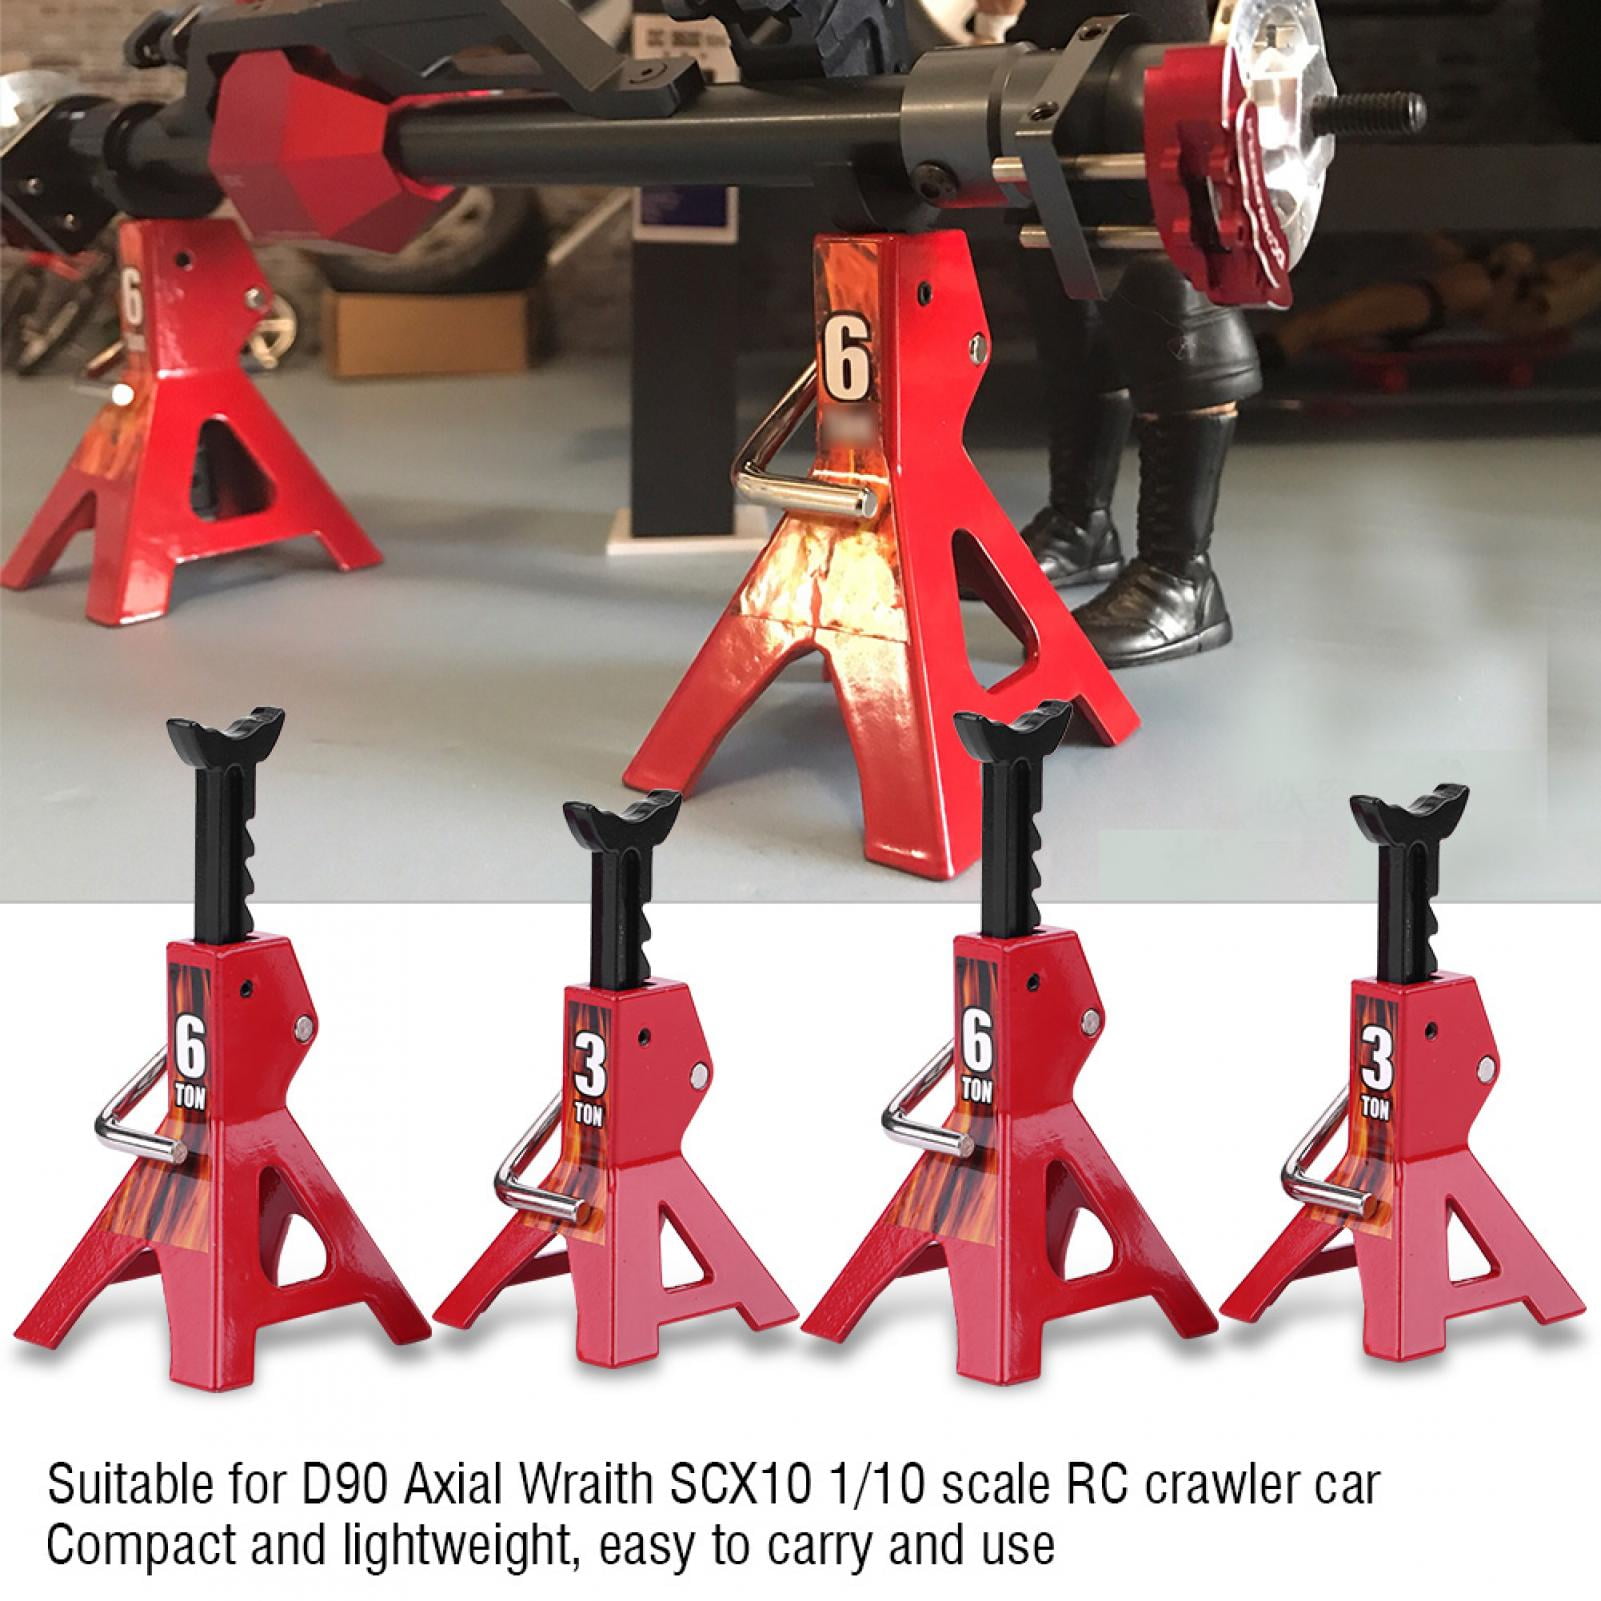 Fdit Metal 6 Ton 3 Ton Simulation Jack Stands for D90 Axial Wraith SCX10 1/...